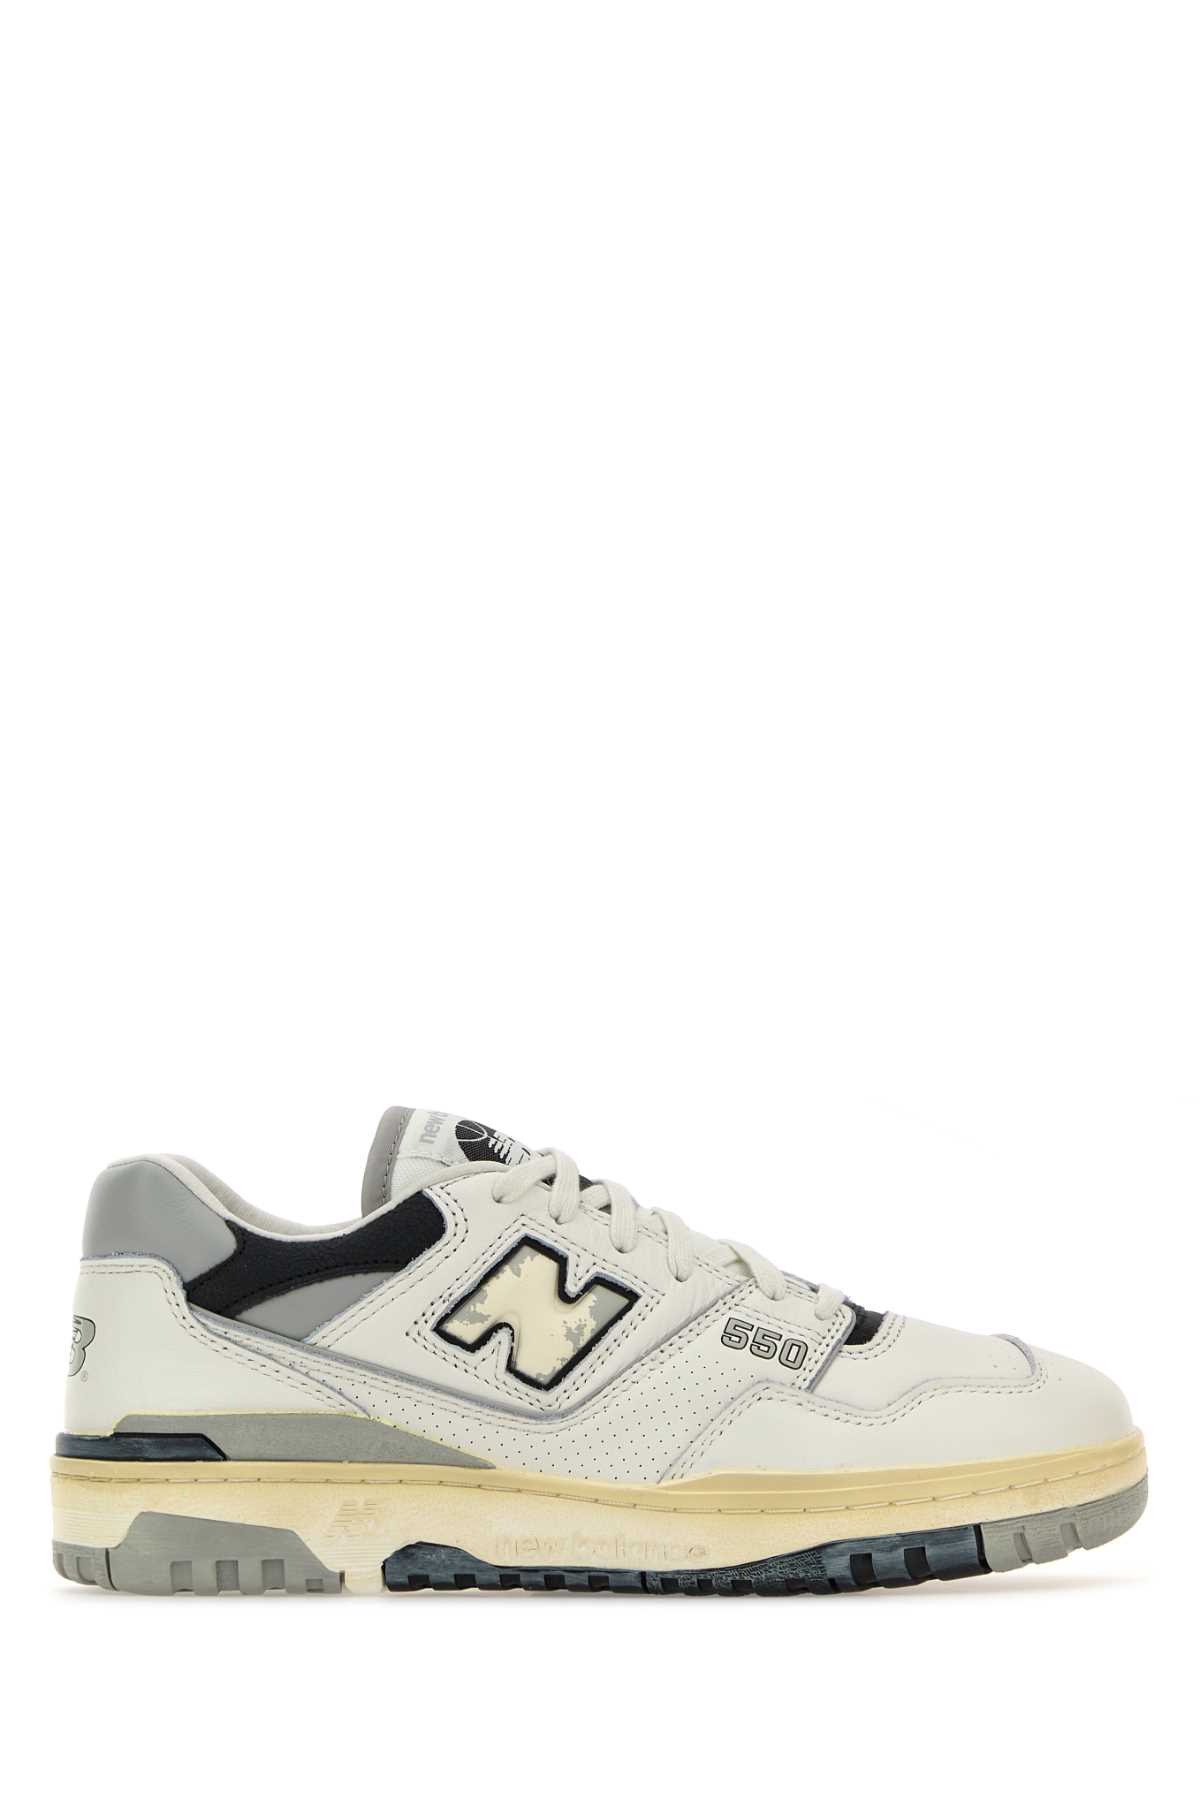 Shop New Balance Multicolor Leather 550 Sneakers In Offwhitegrey